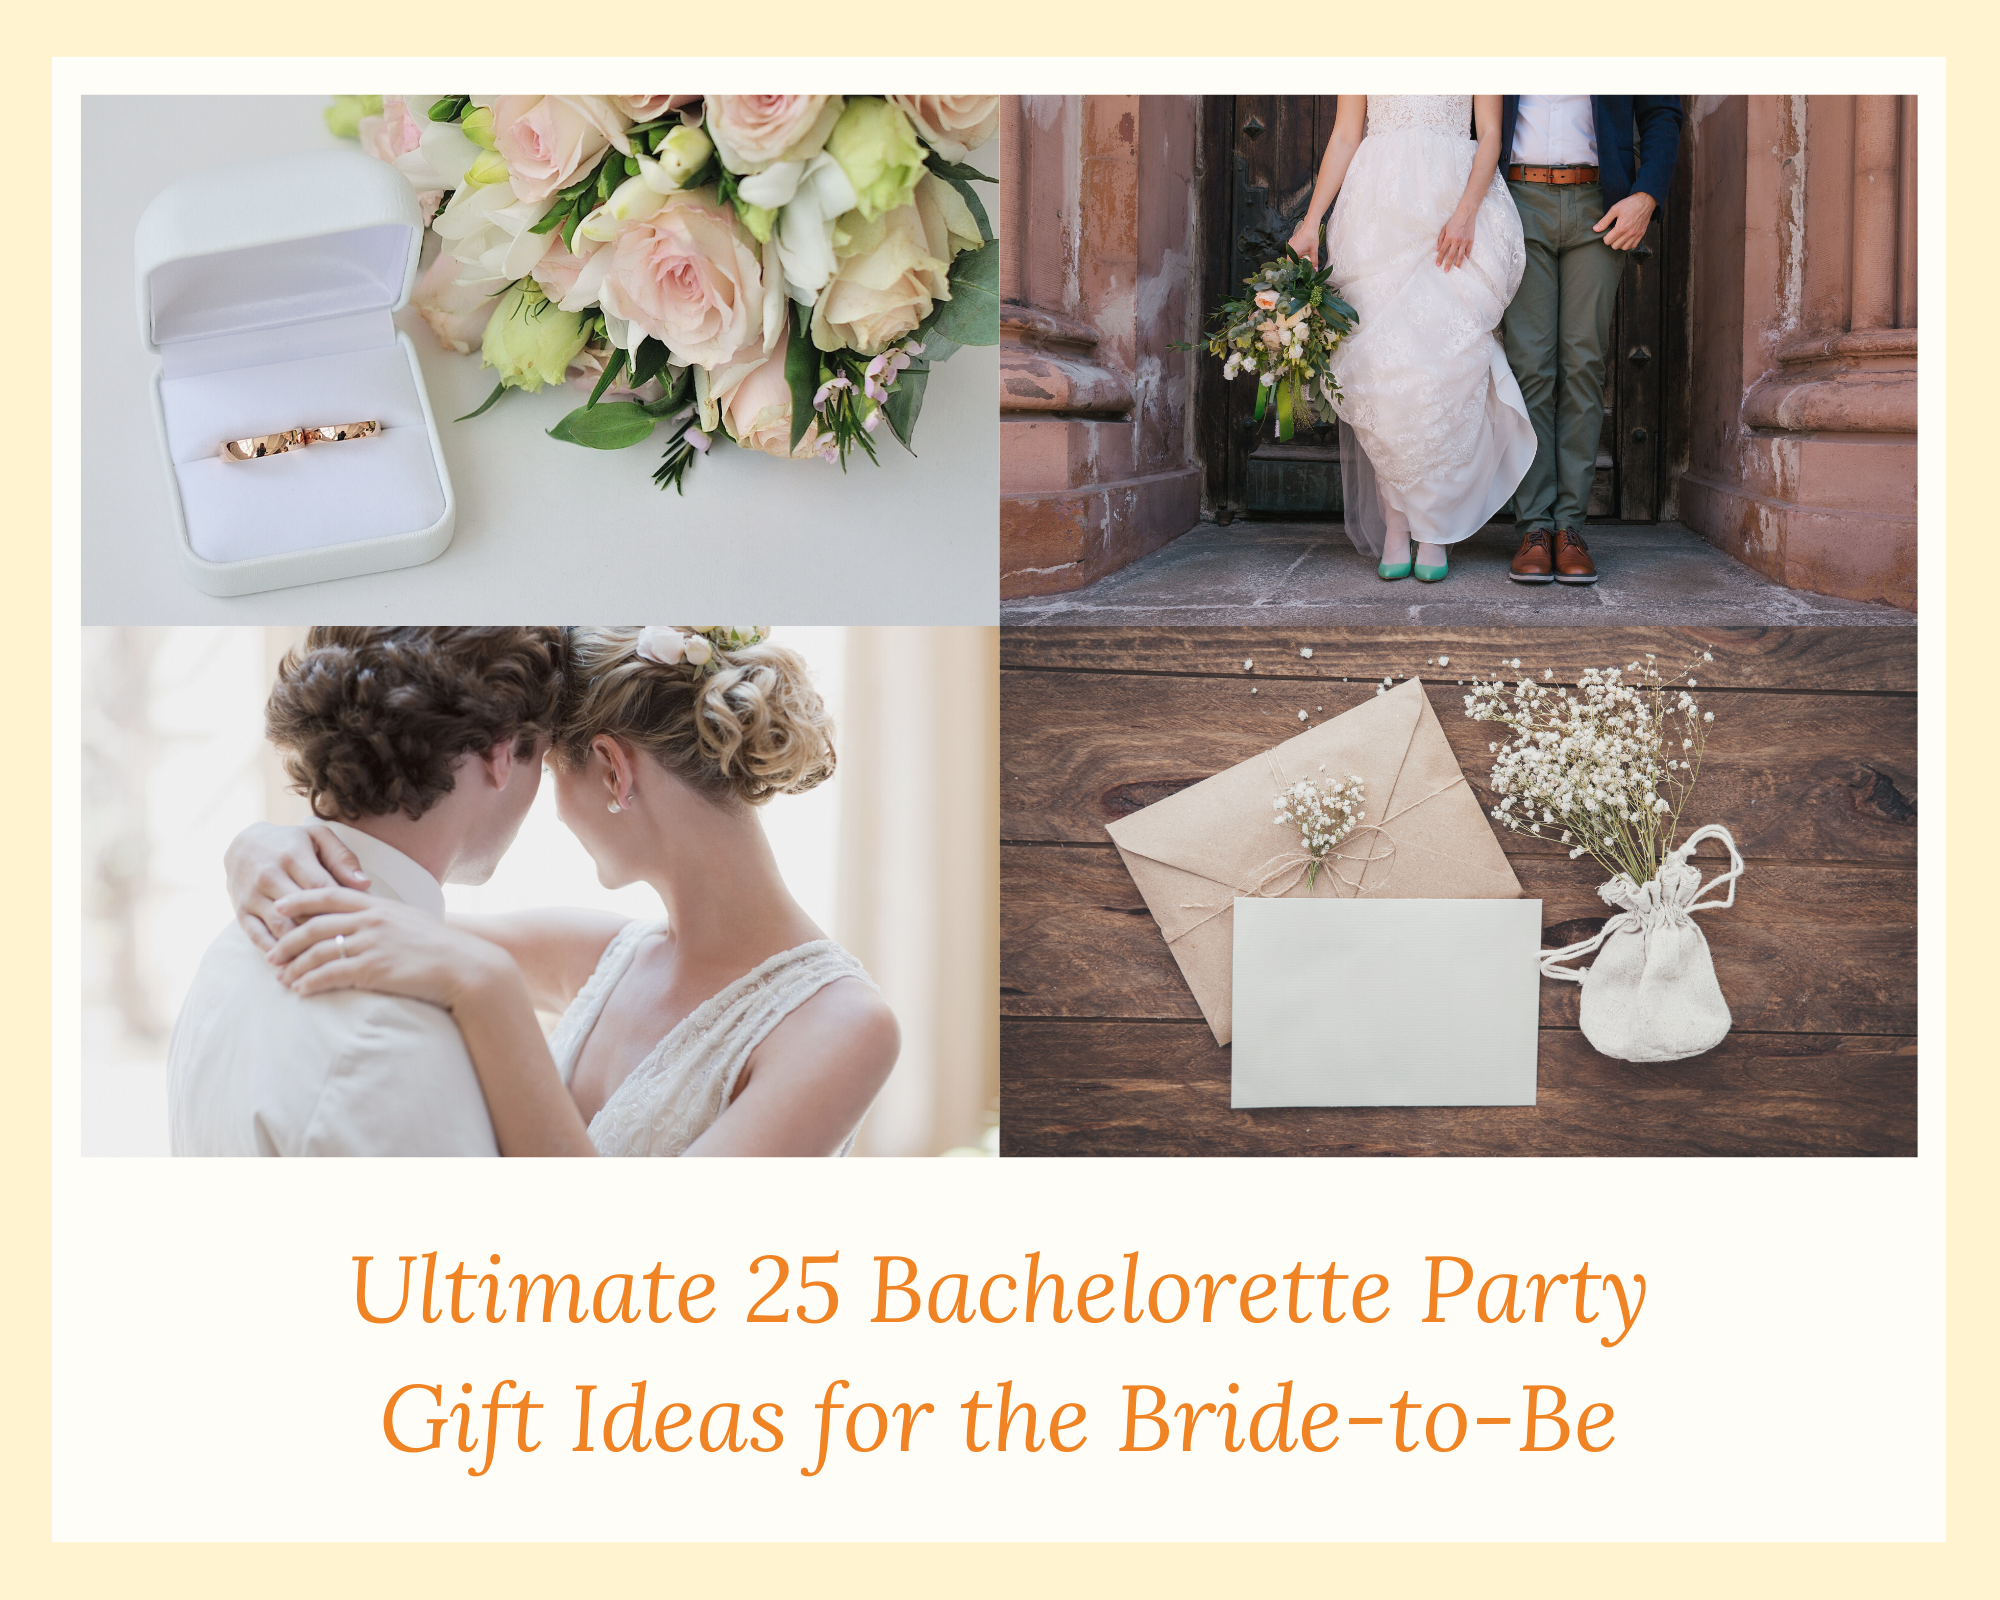 35 Bachelorette Party Gifts: Spoil Your Bride-To-Be!